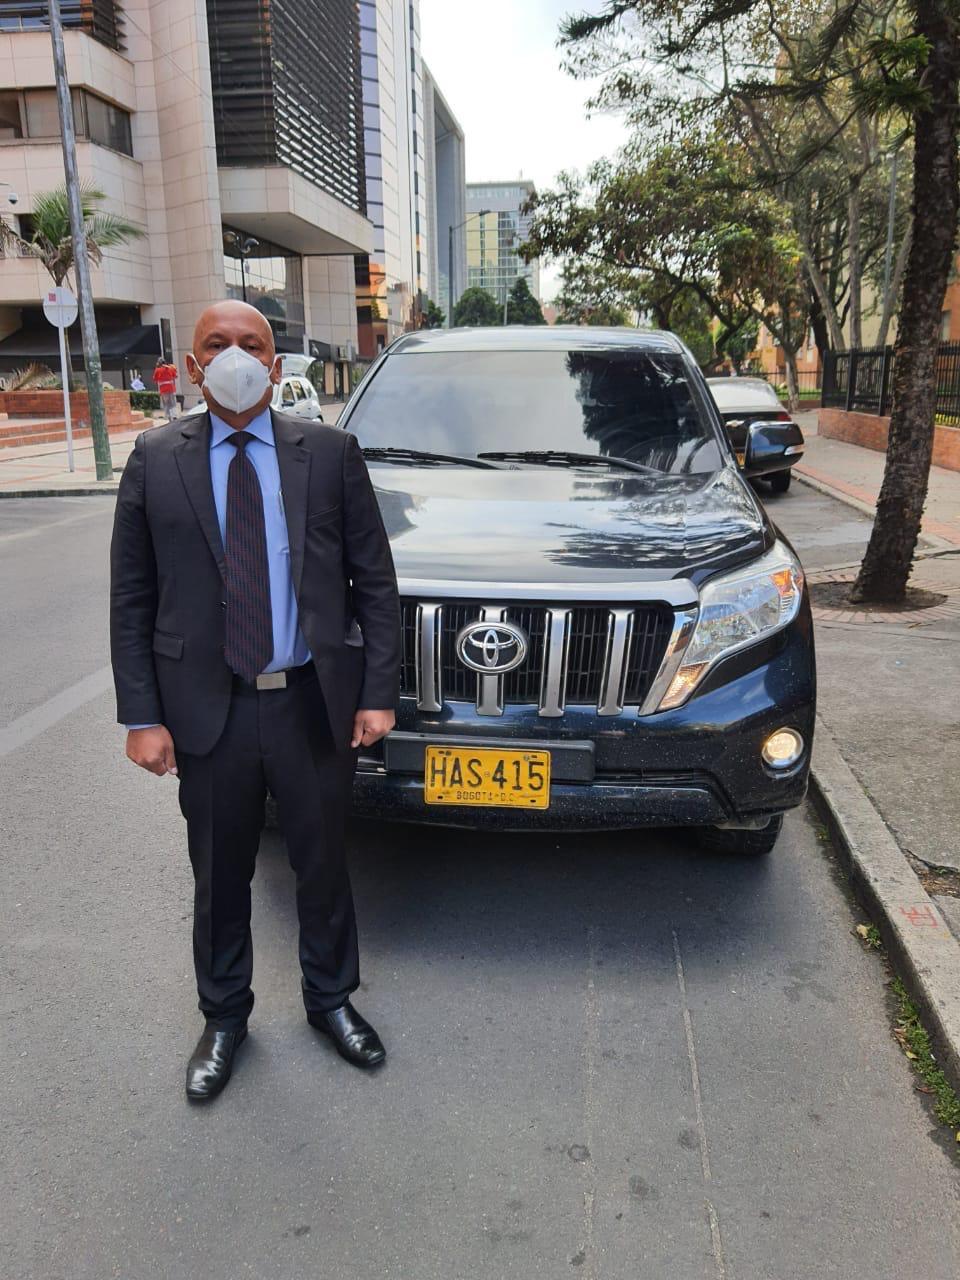 A person in a suit standing in front of a car

Description automatically generated